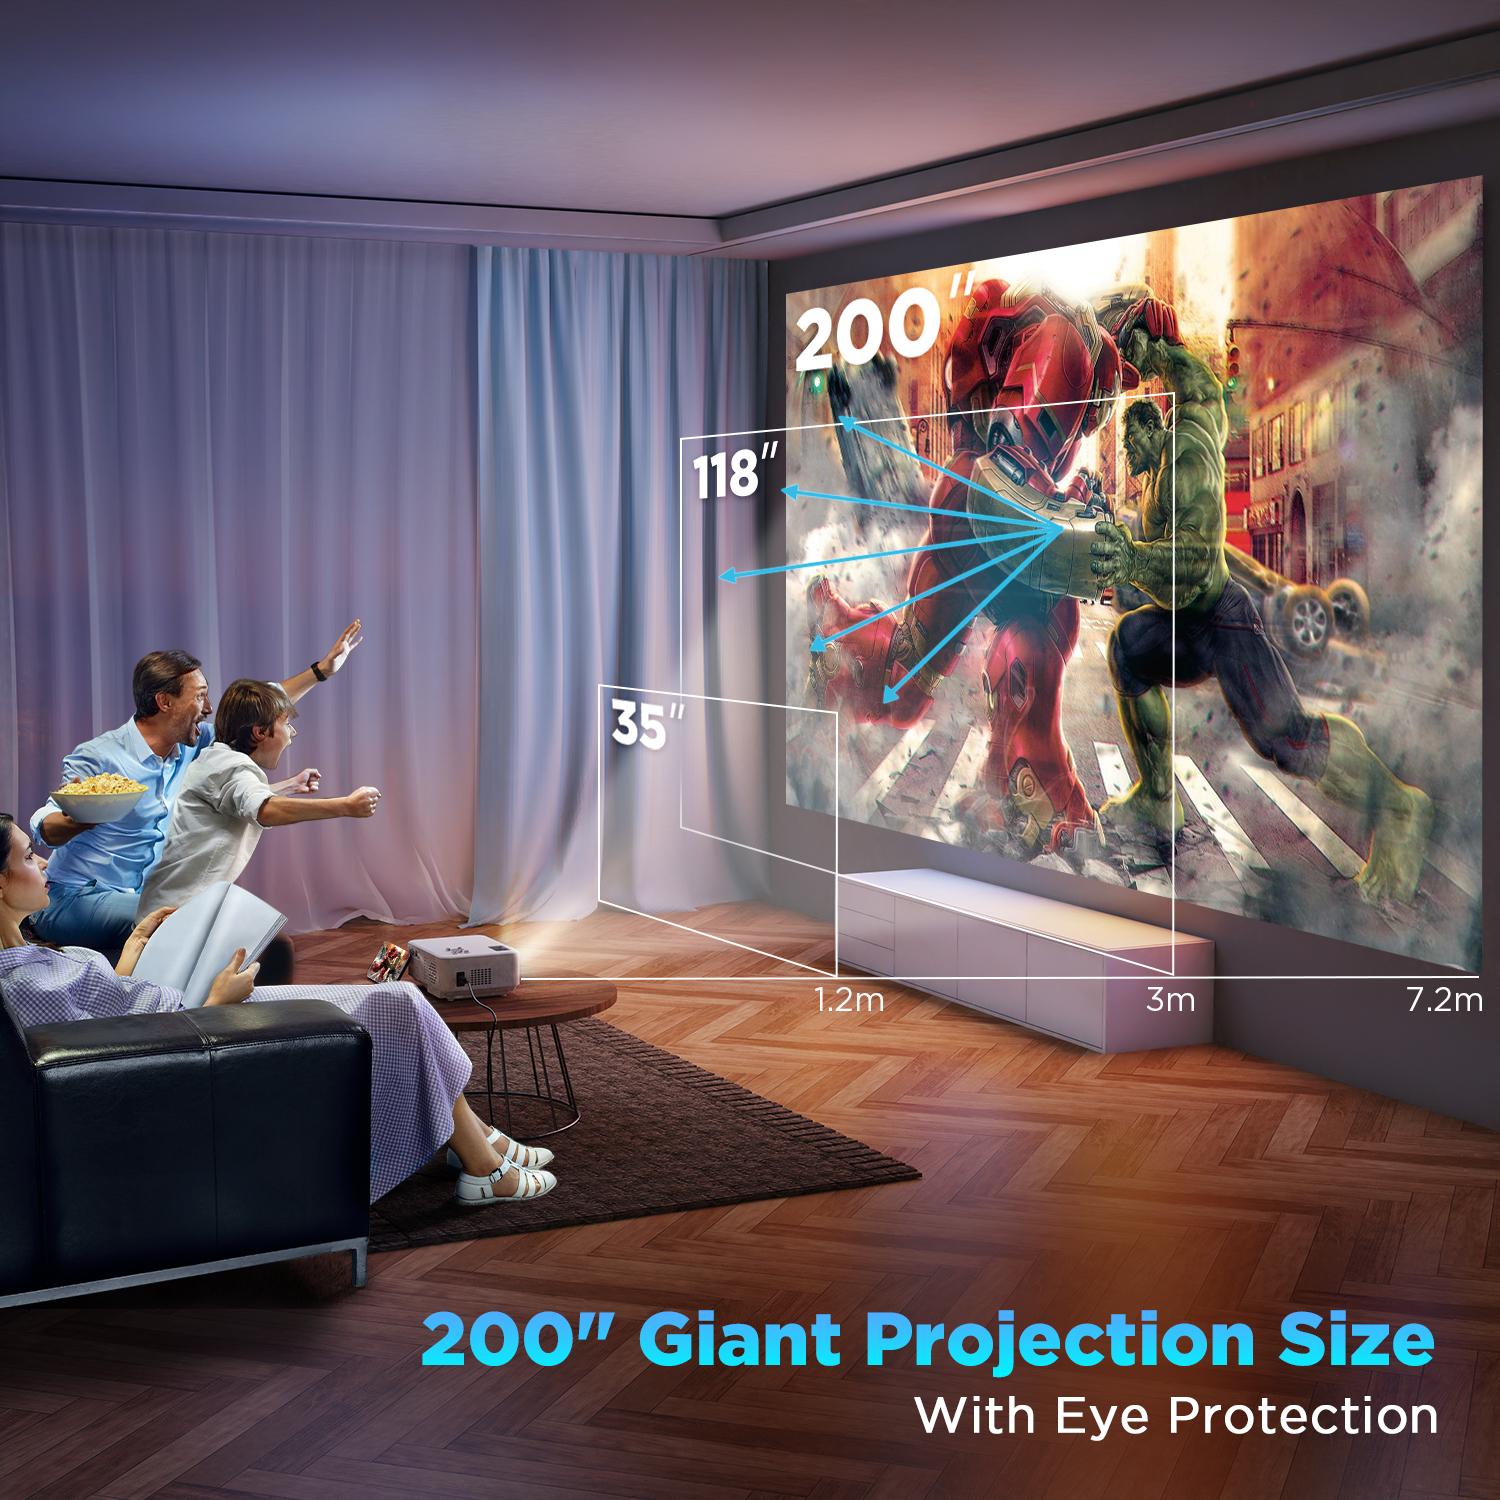 WiFi Projector | HD 1080P 200" Display Supported Home Theater Projector | Portable Mini Projector for Outdoor Movie Night - image 9 of 11